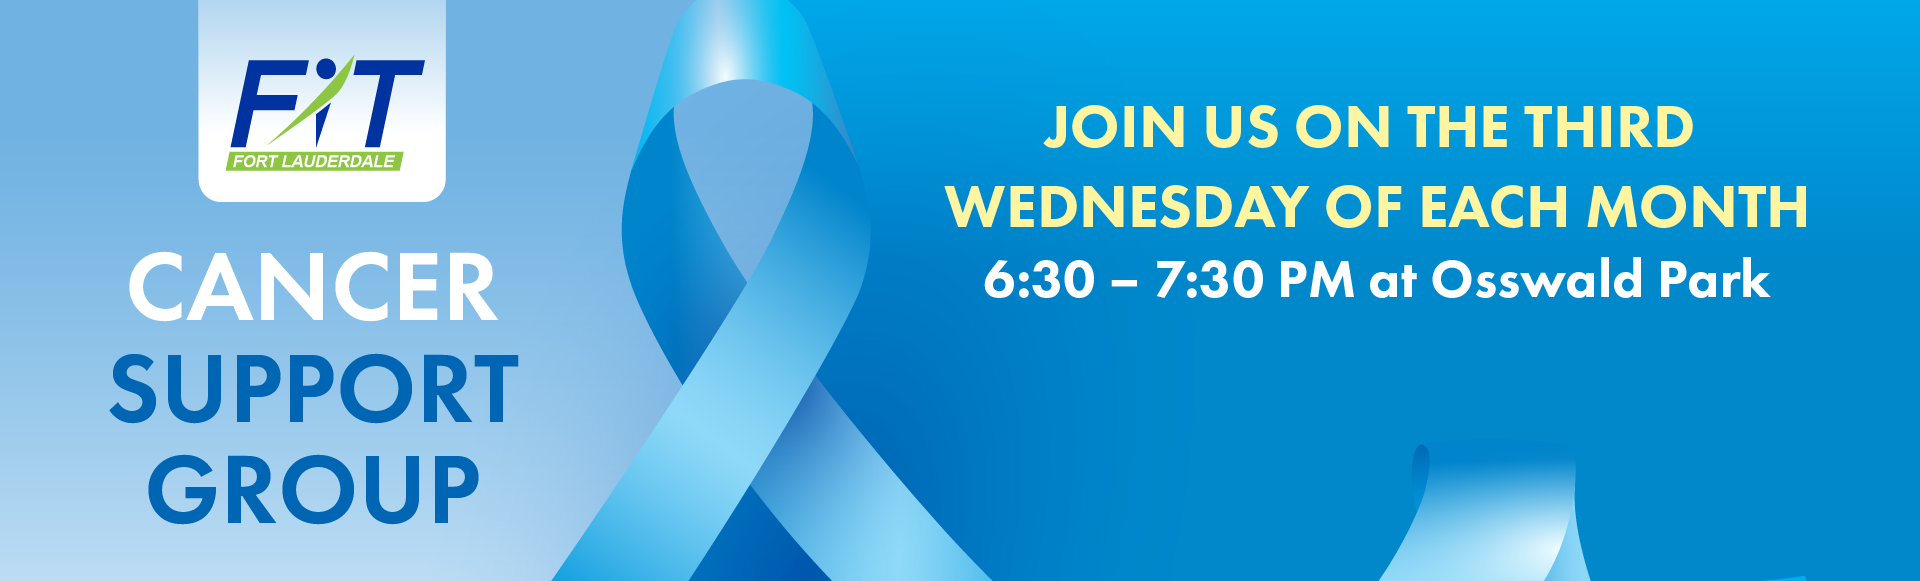 Fit Fort Lauderdale Cancer Support Group. Third Wednesday of each month. 6:30-7:30 PM. Osswald Park.